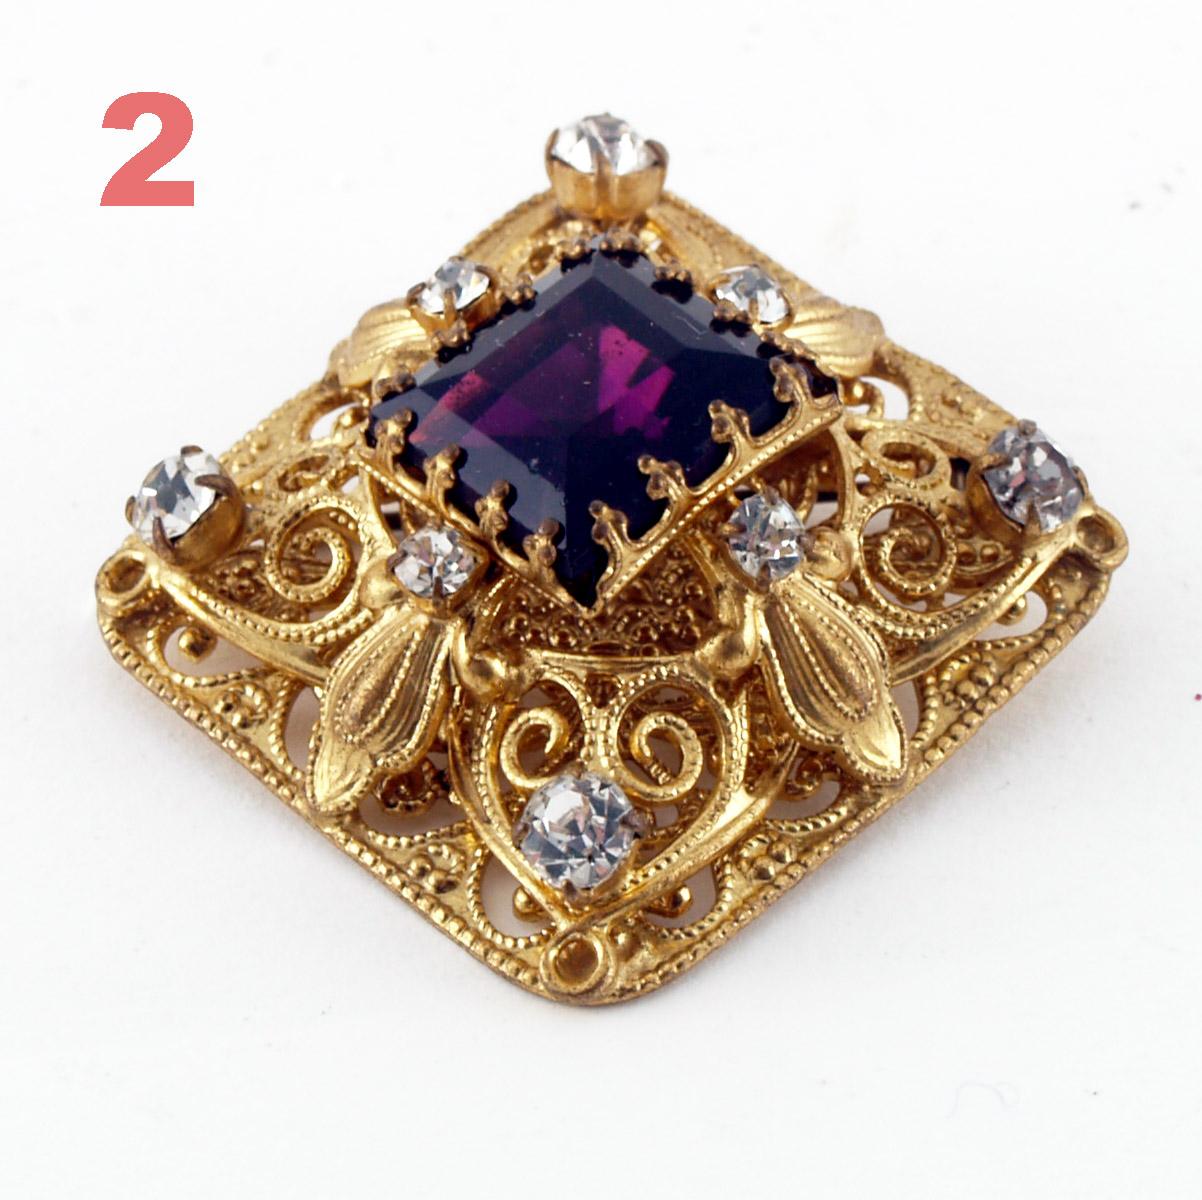 Gilt Early 20th Century Grandma's Brooches, Art Nouveau, Zircons, Hard Stones, Pearls For Sale